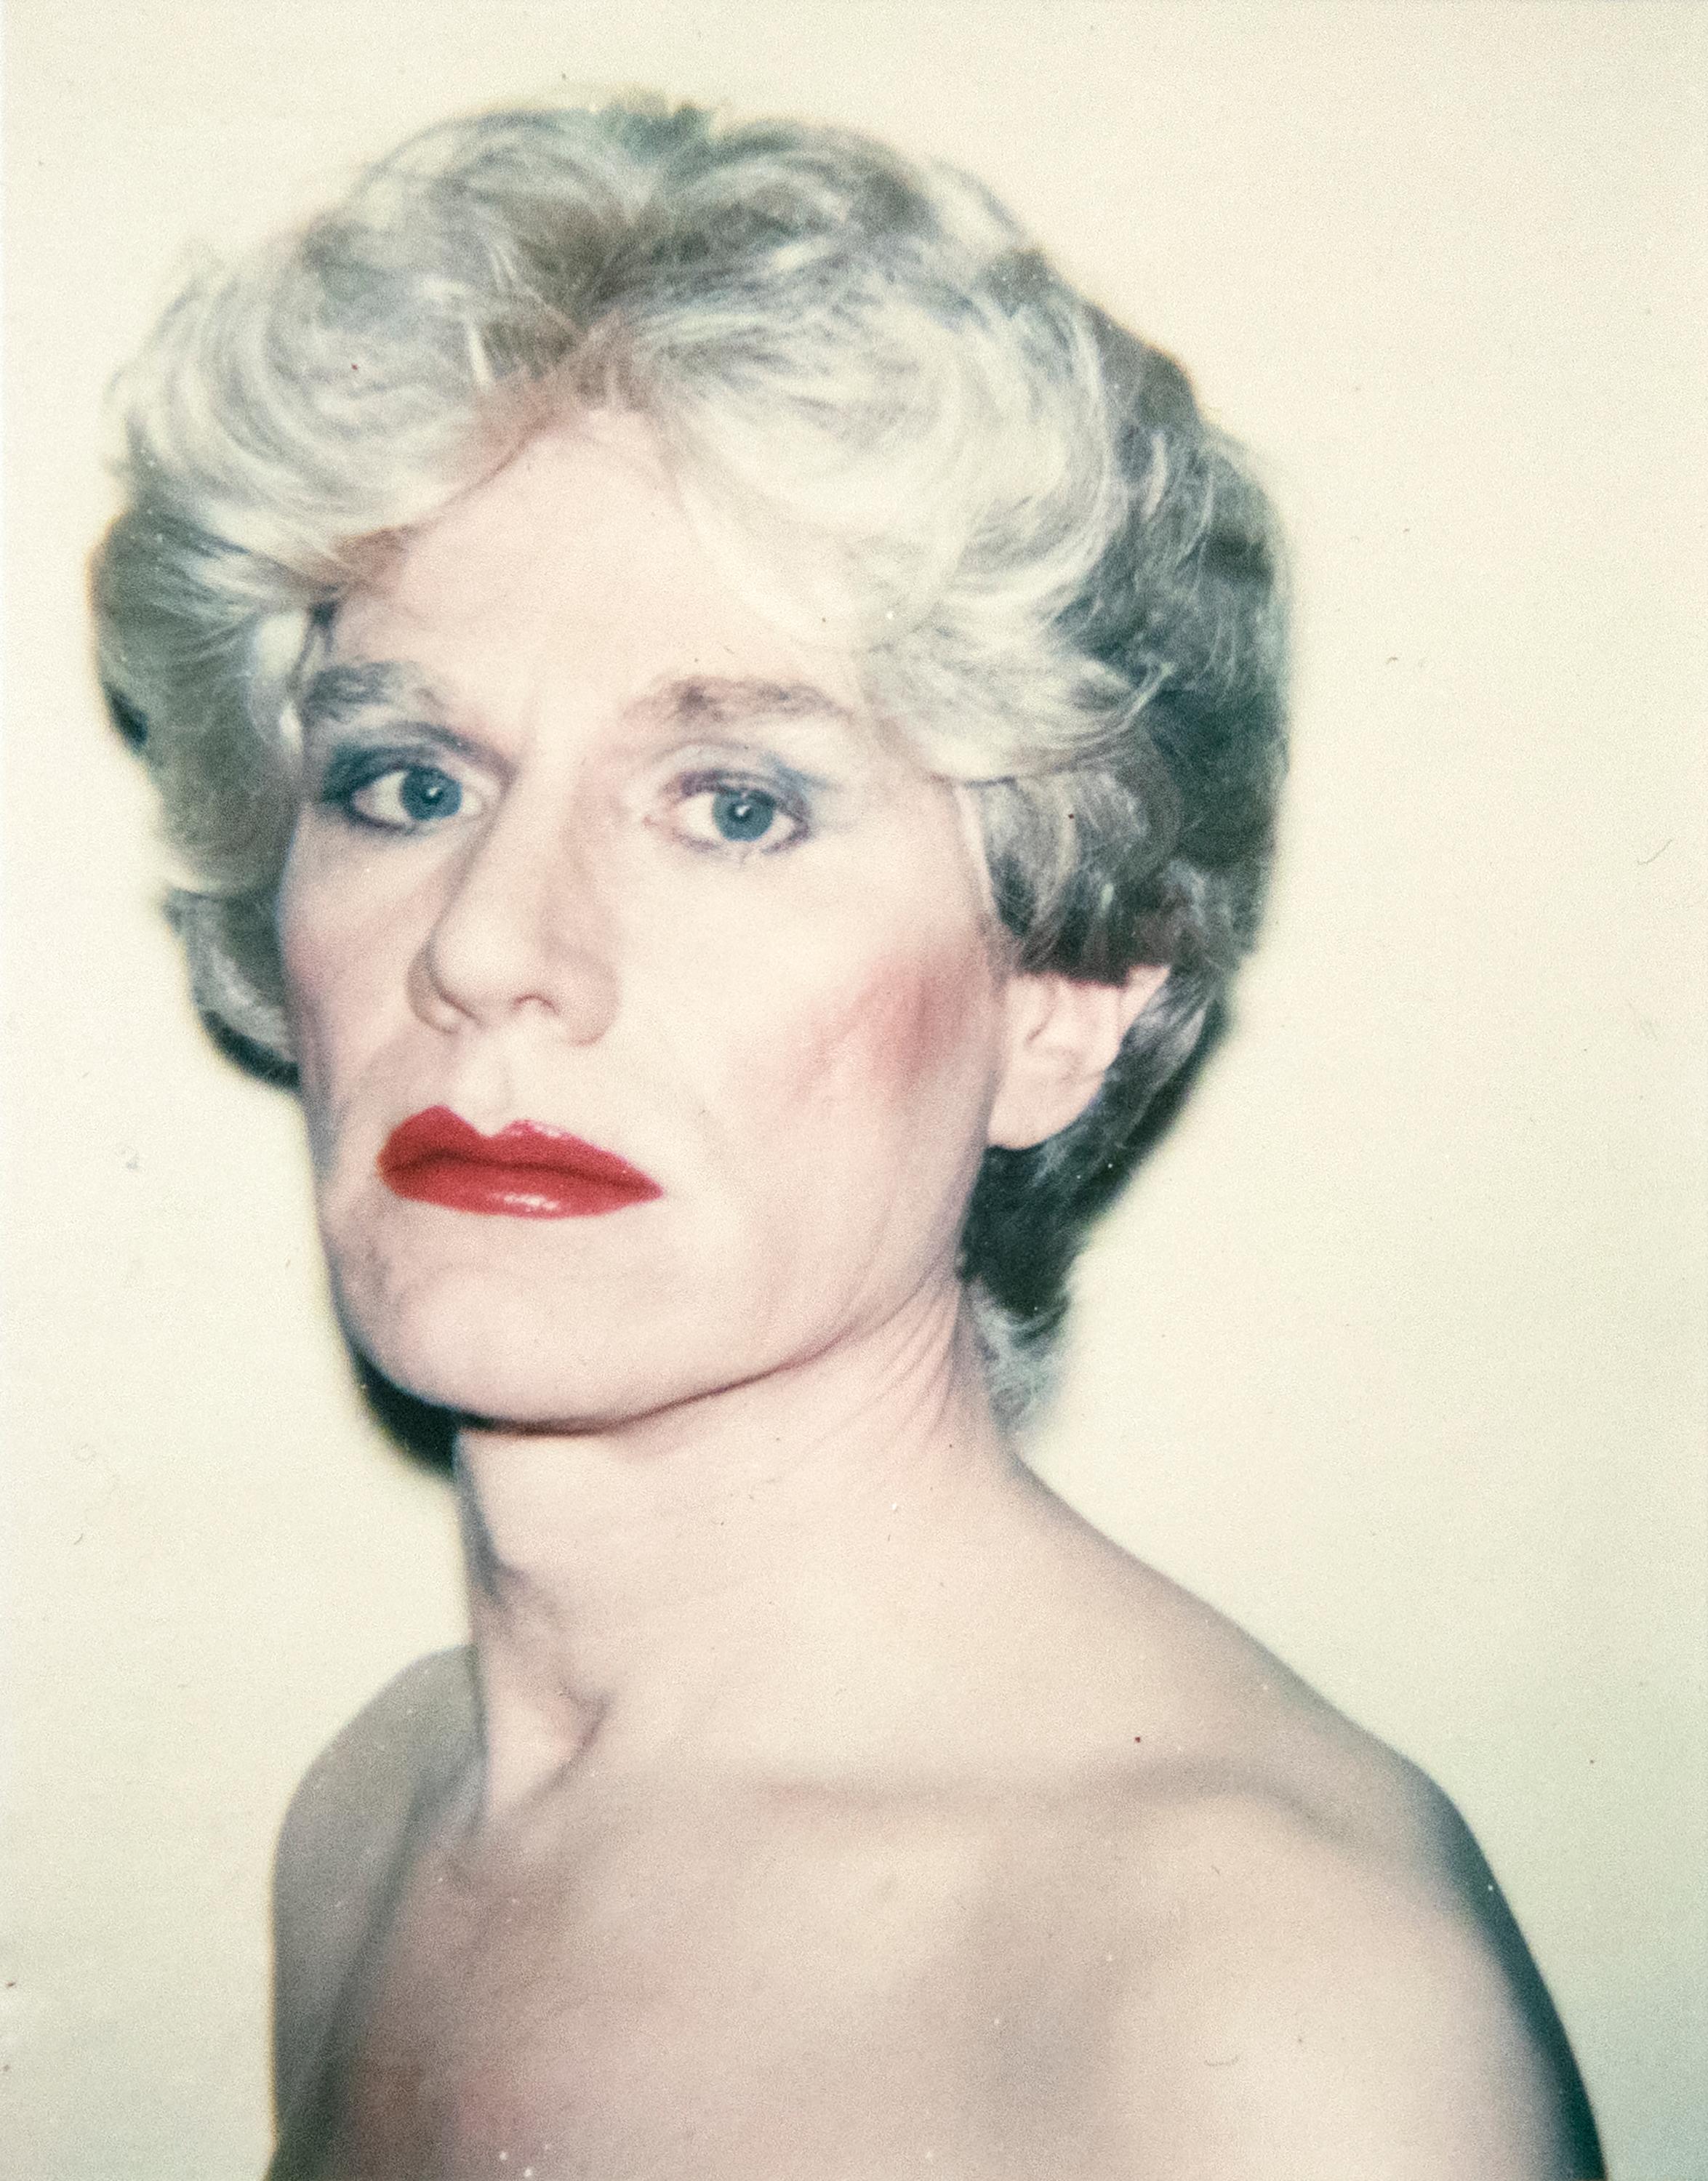 Andy Warhol Color Photograph - Self Portrait in Drag